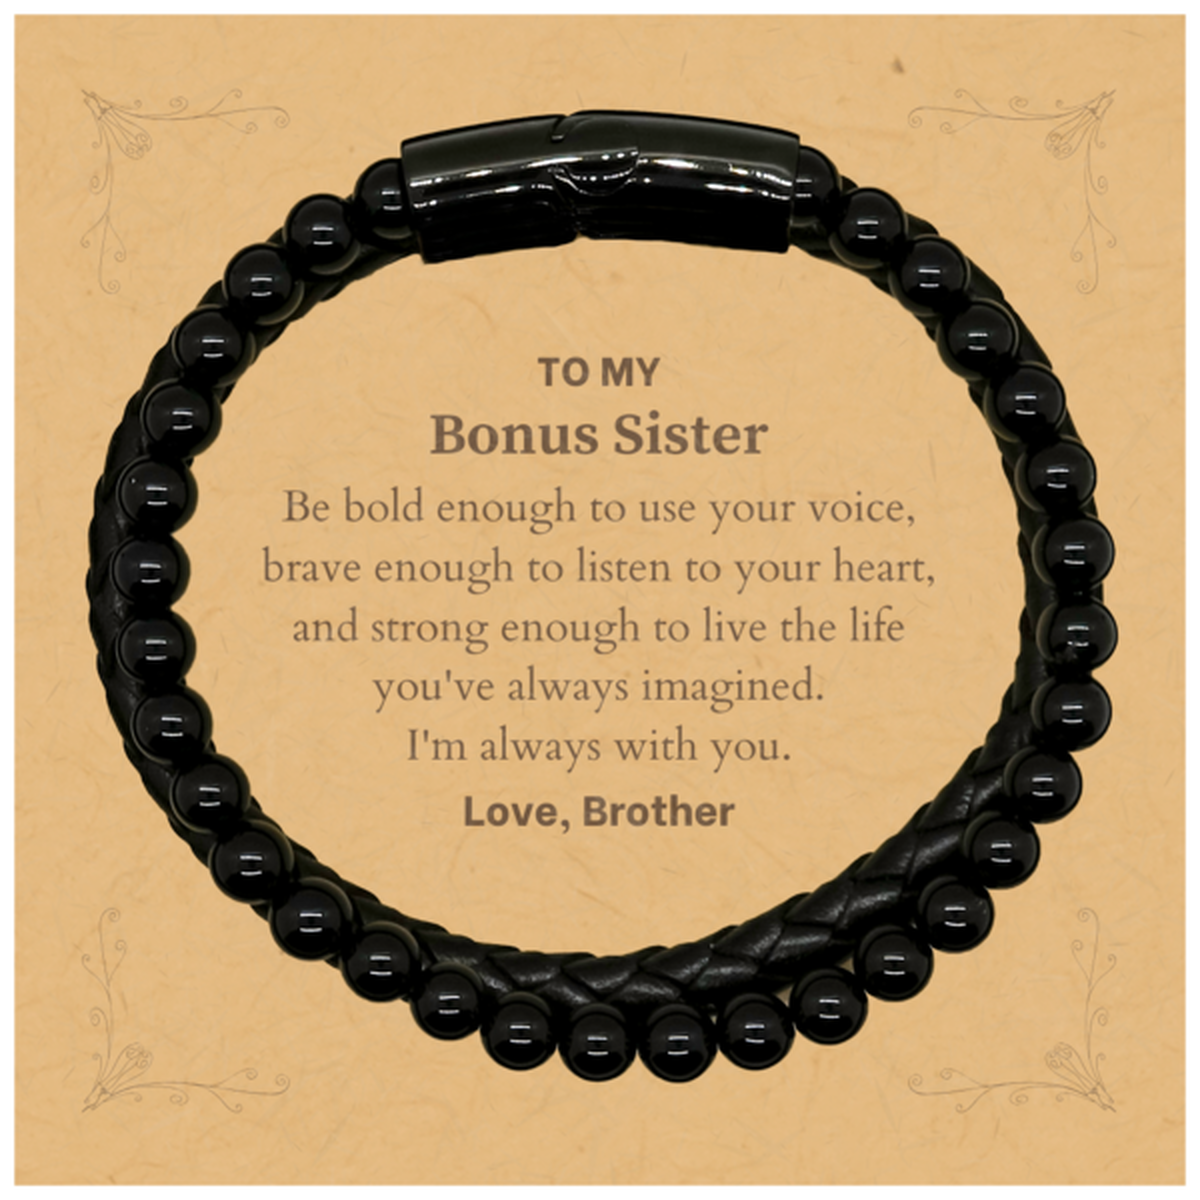 Keepsake Bonus Sister Stone Leather Bracelets Gift Idea Graduation Christmas Birthday Bonus Sister from Brother, Bonus Sister Be bold enough to use your voice, brave enough to listen to your heart. Love, Brother